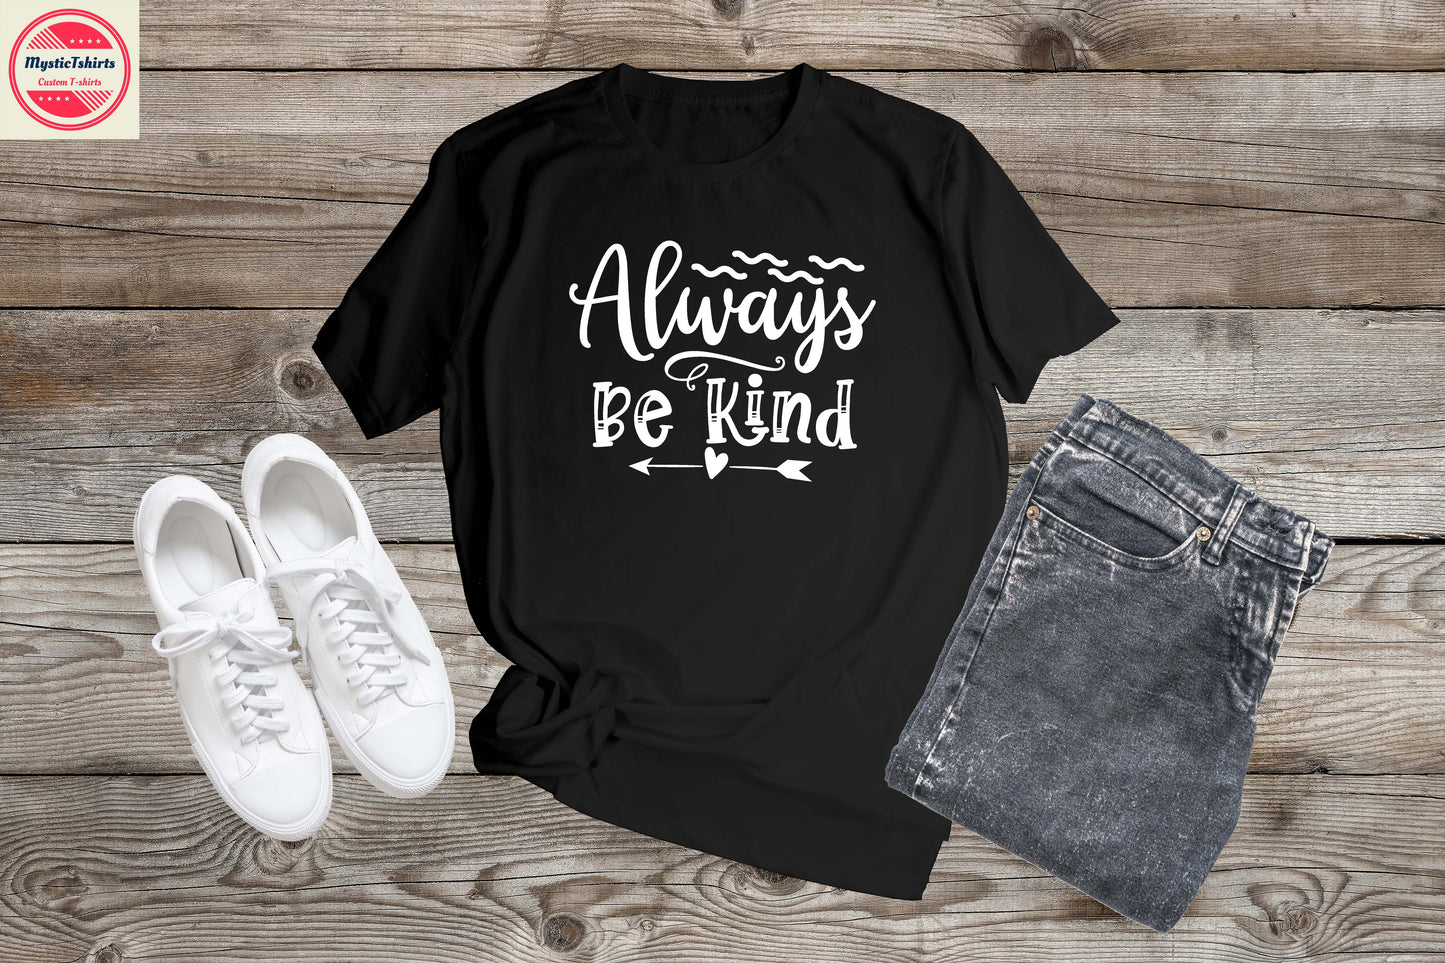 013. ALWAYS BE KIND, Custom Made Shirt, Personalized T-Shirt, Custom Text, Make Your Own Shirt, Custom Tee